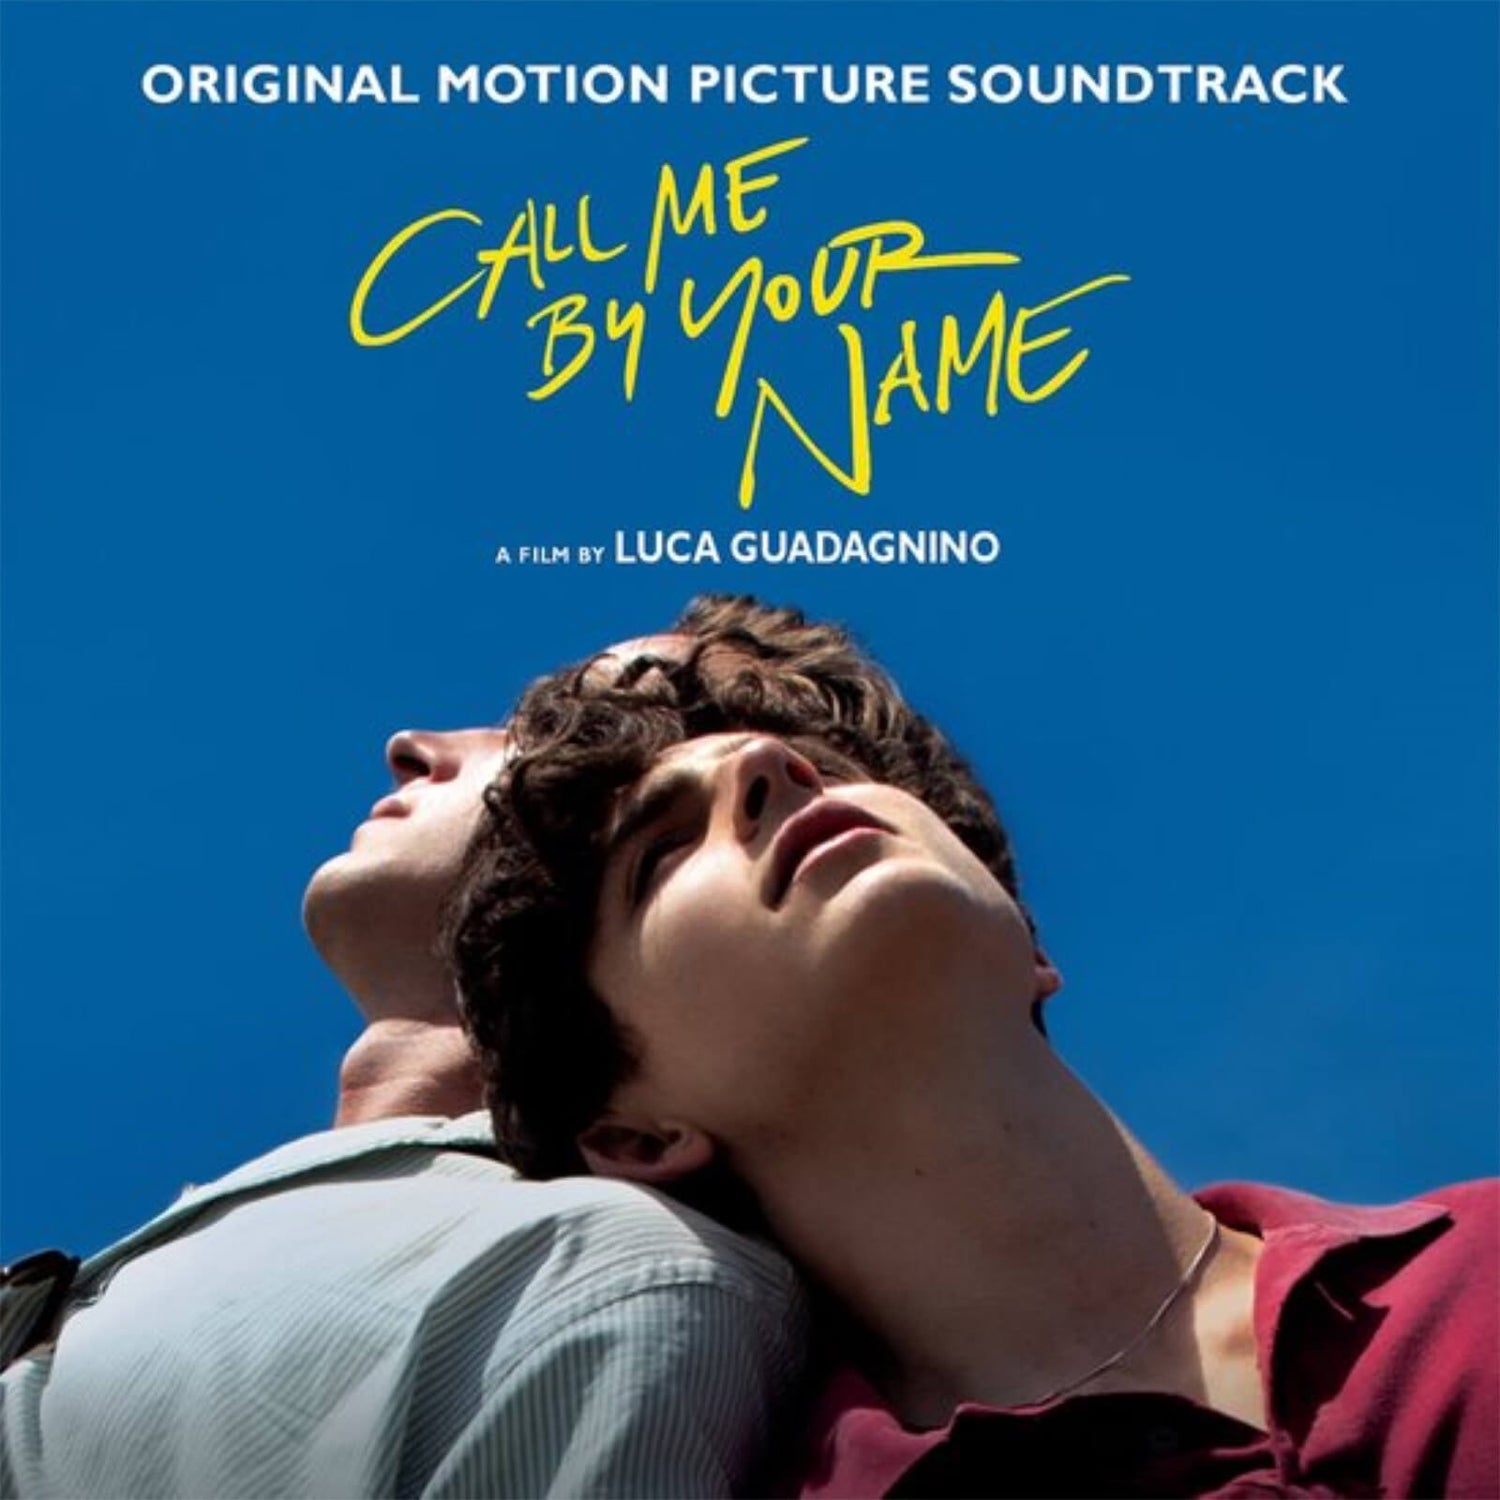 Call Me By Your Name (Original Motion Picture Soundtrack) 180g Vinyl (Countryside Green)